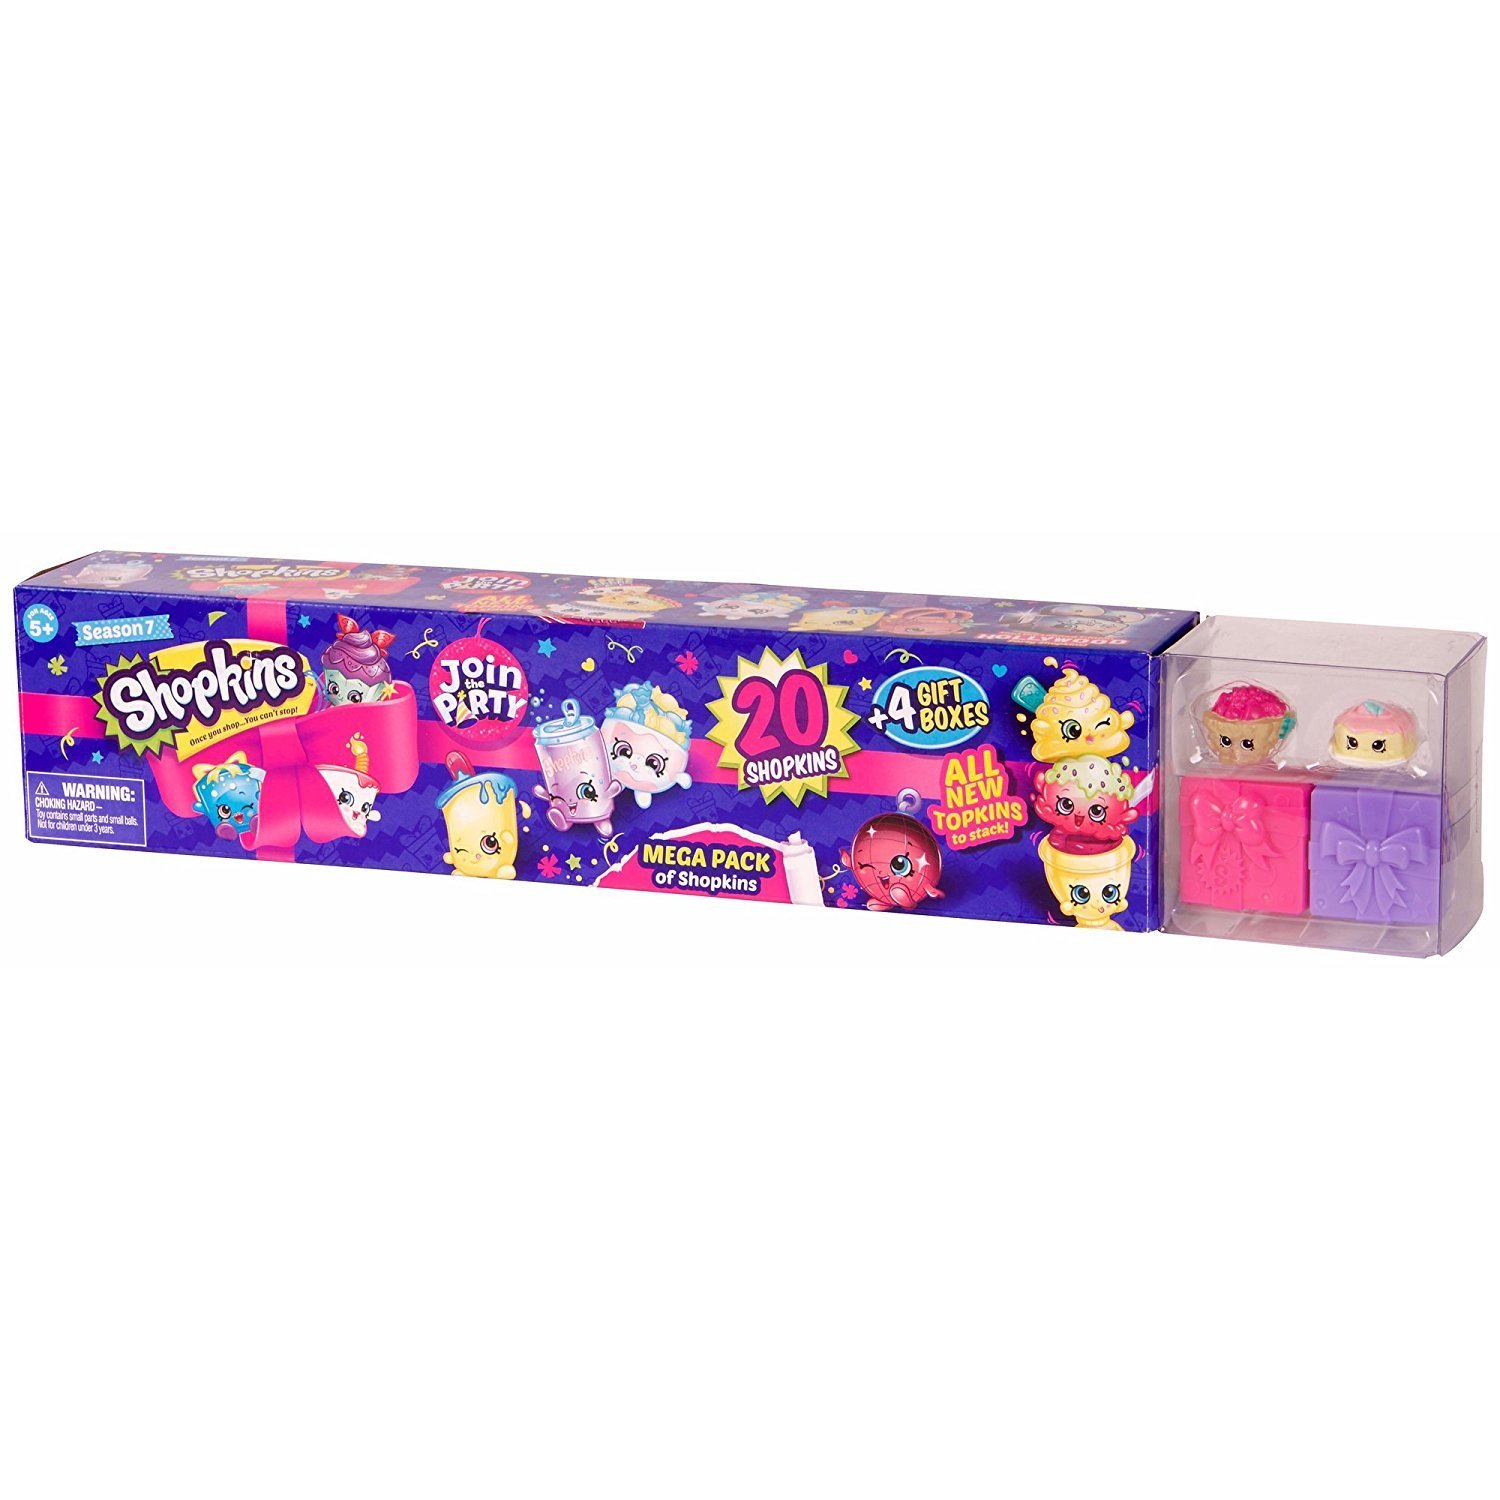 SHOPKINS JOIN THE PARTY MEGA PACK